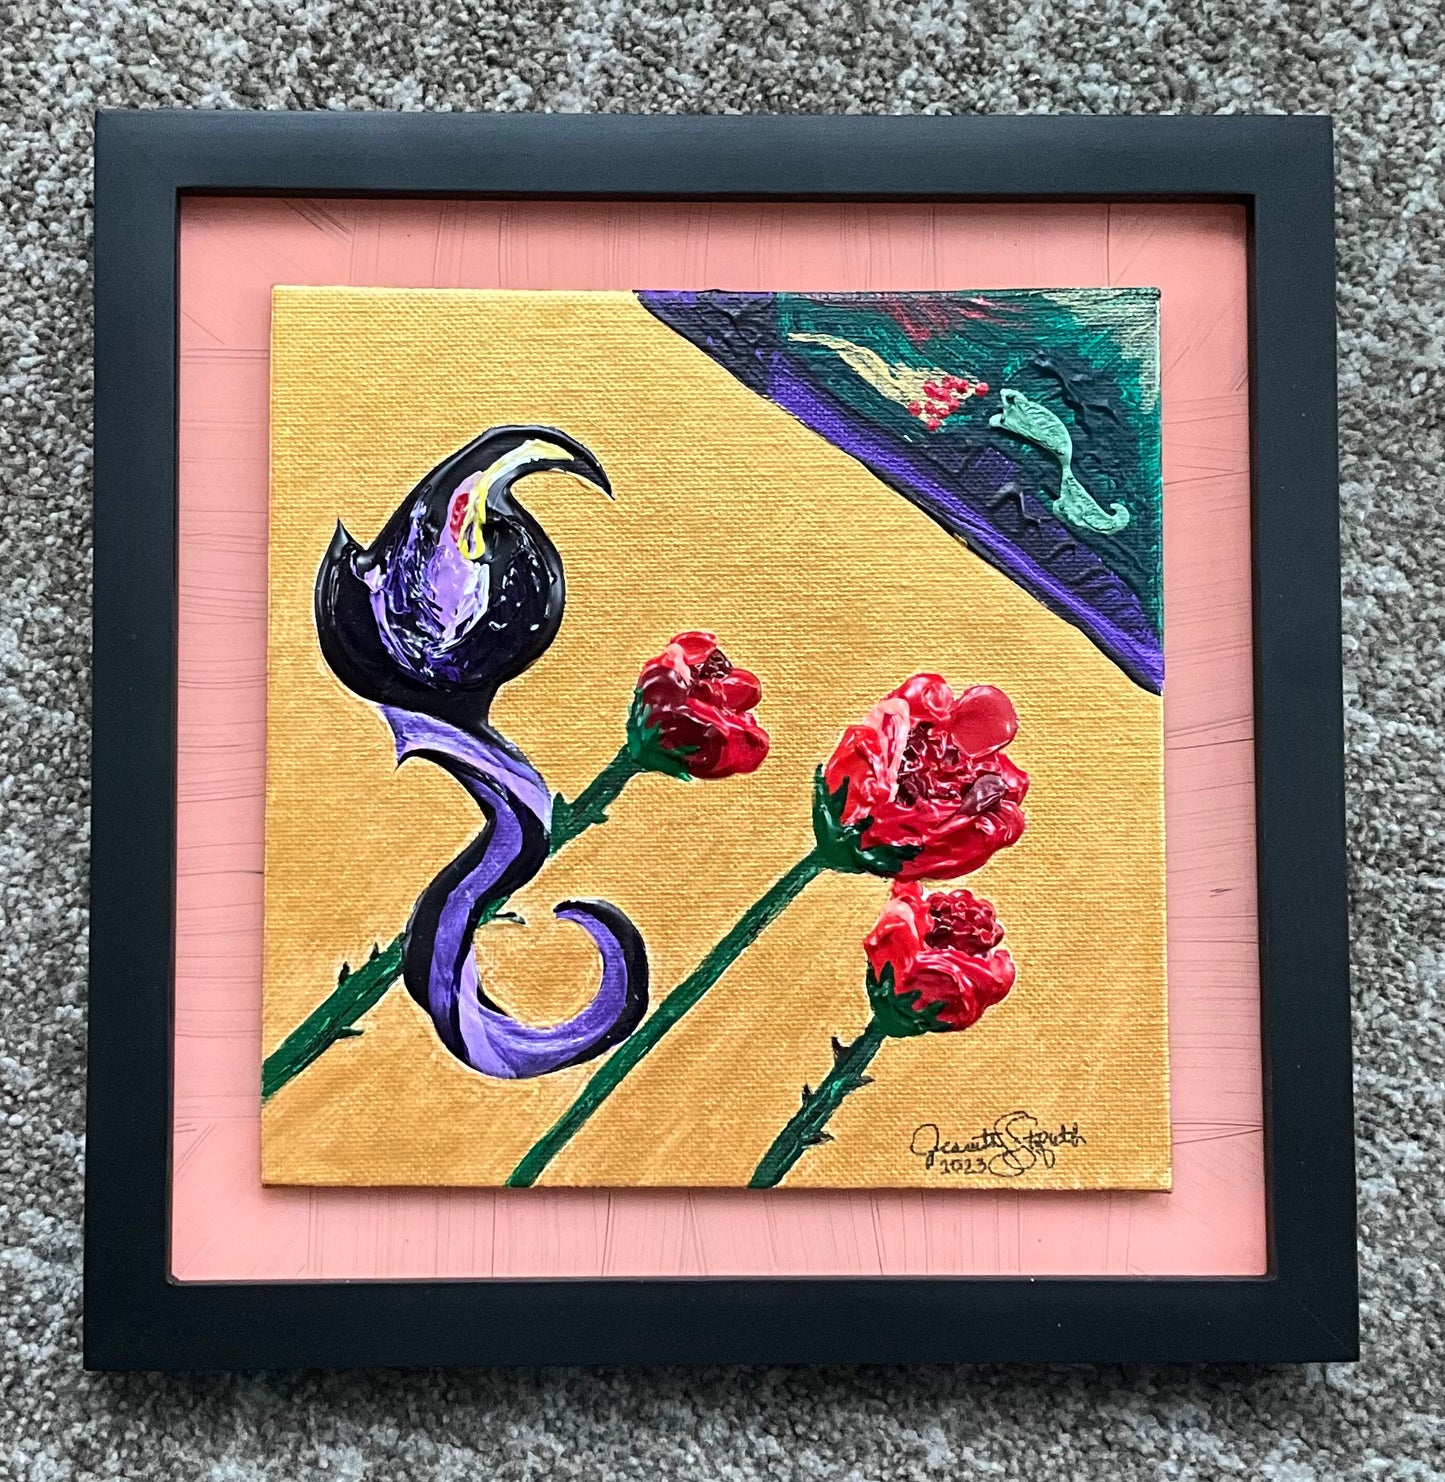 “You, Me, Us” - 11”x11” - 3D Acrylic on Canvas - Framed. Signed.